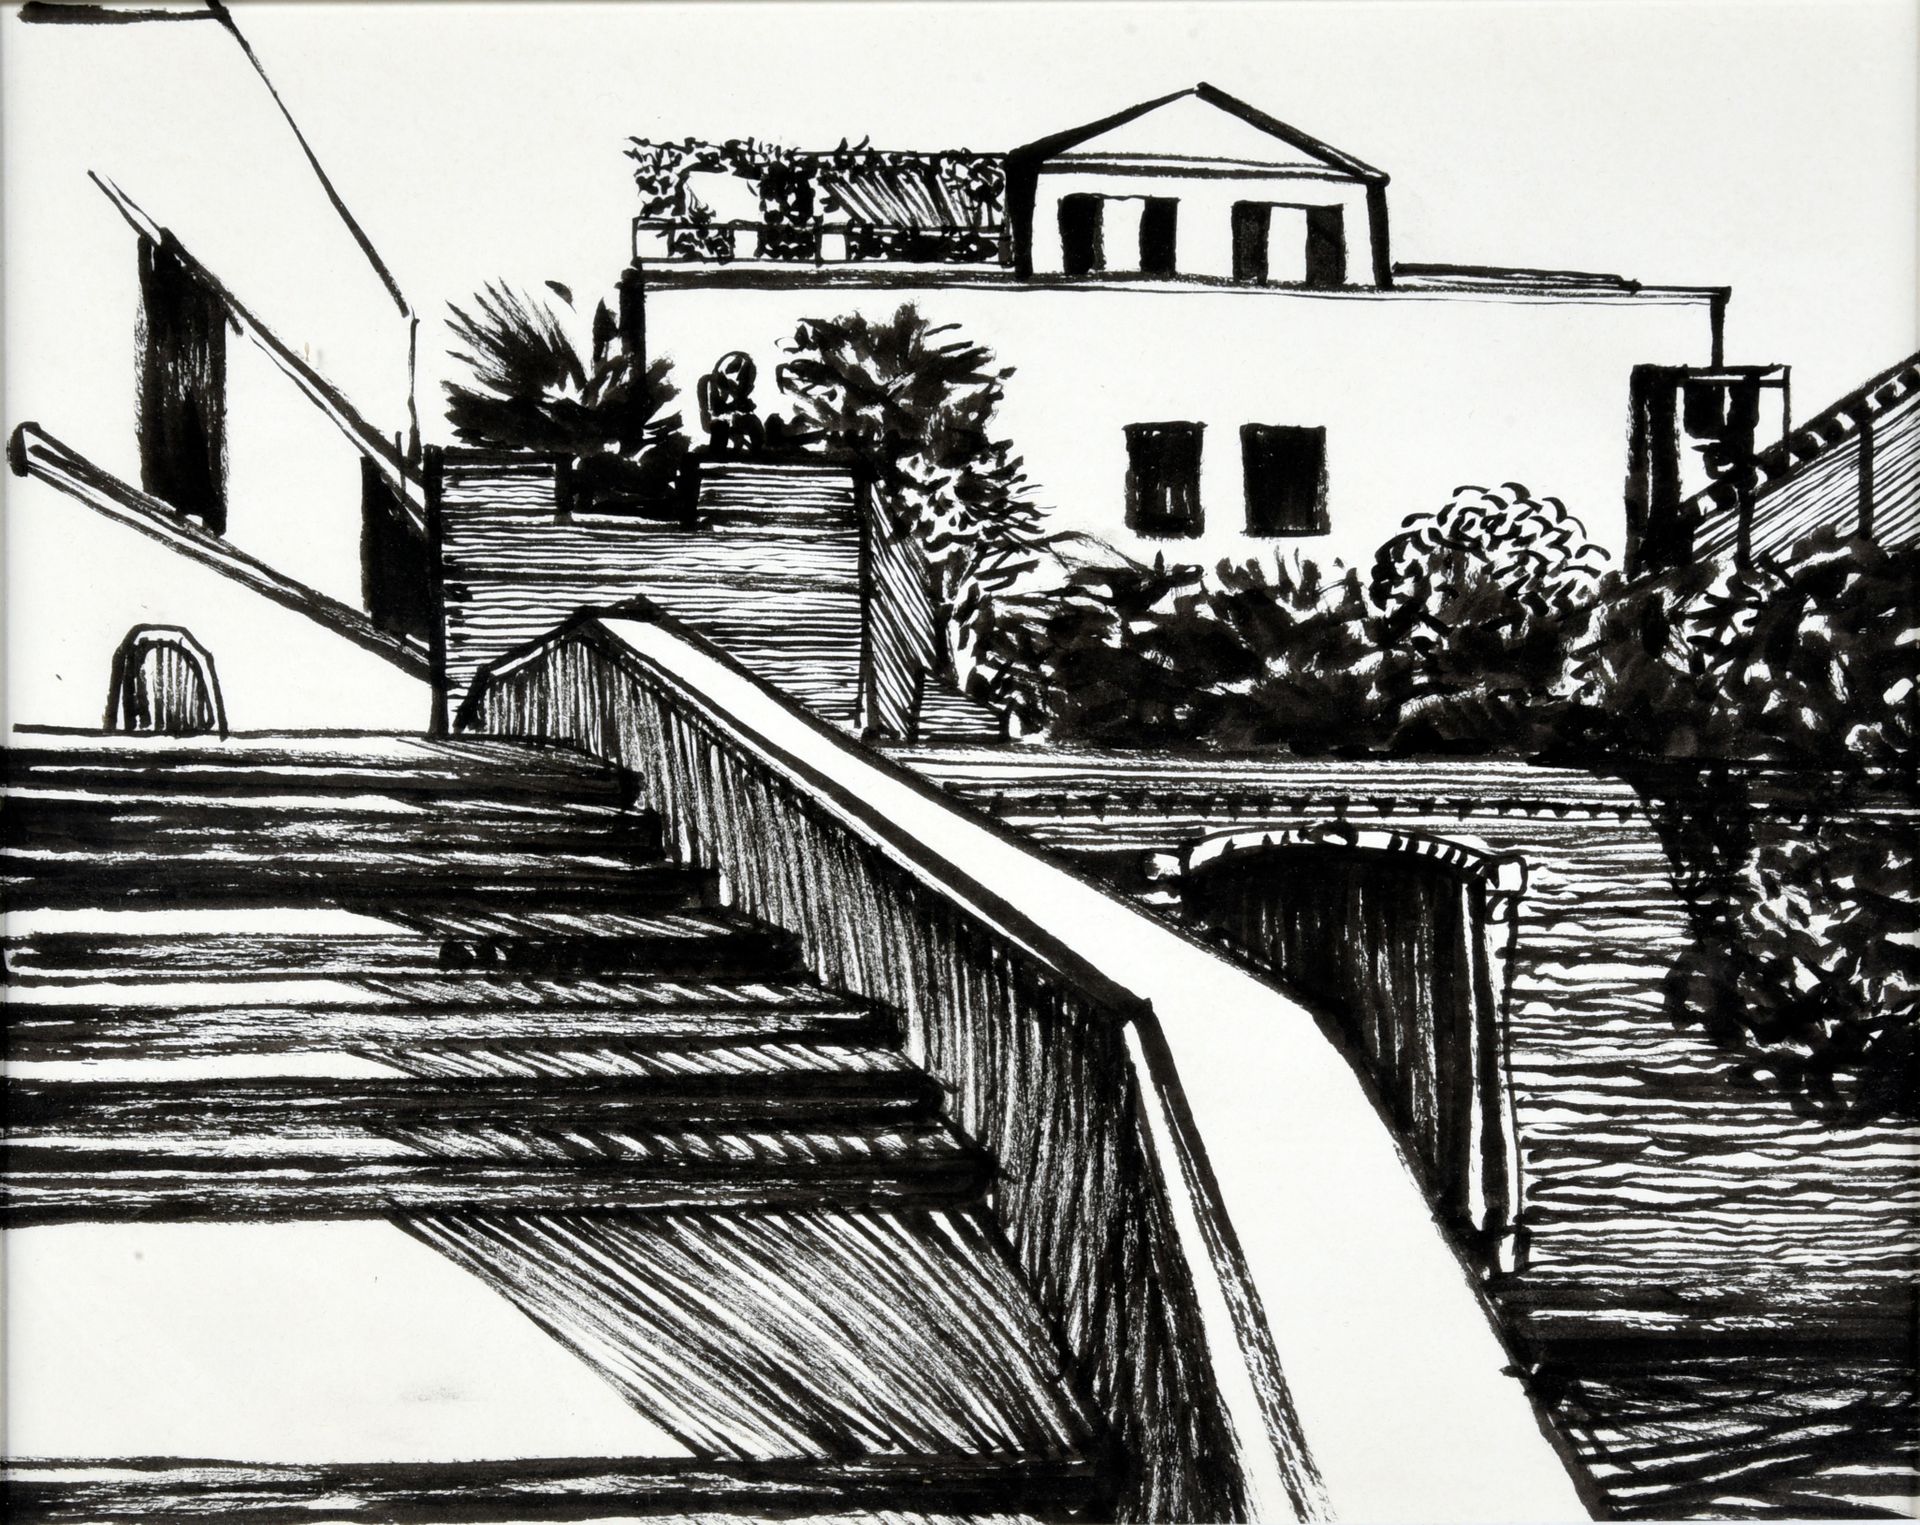 MATTOTTI, Lorenzo (1954) Venice.

India ink for a work presented in 2011 at the &hellip;